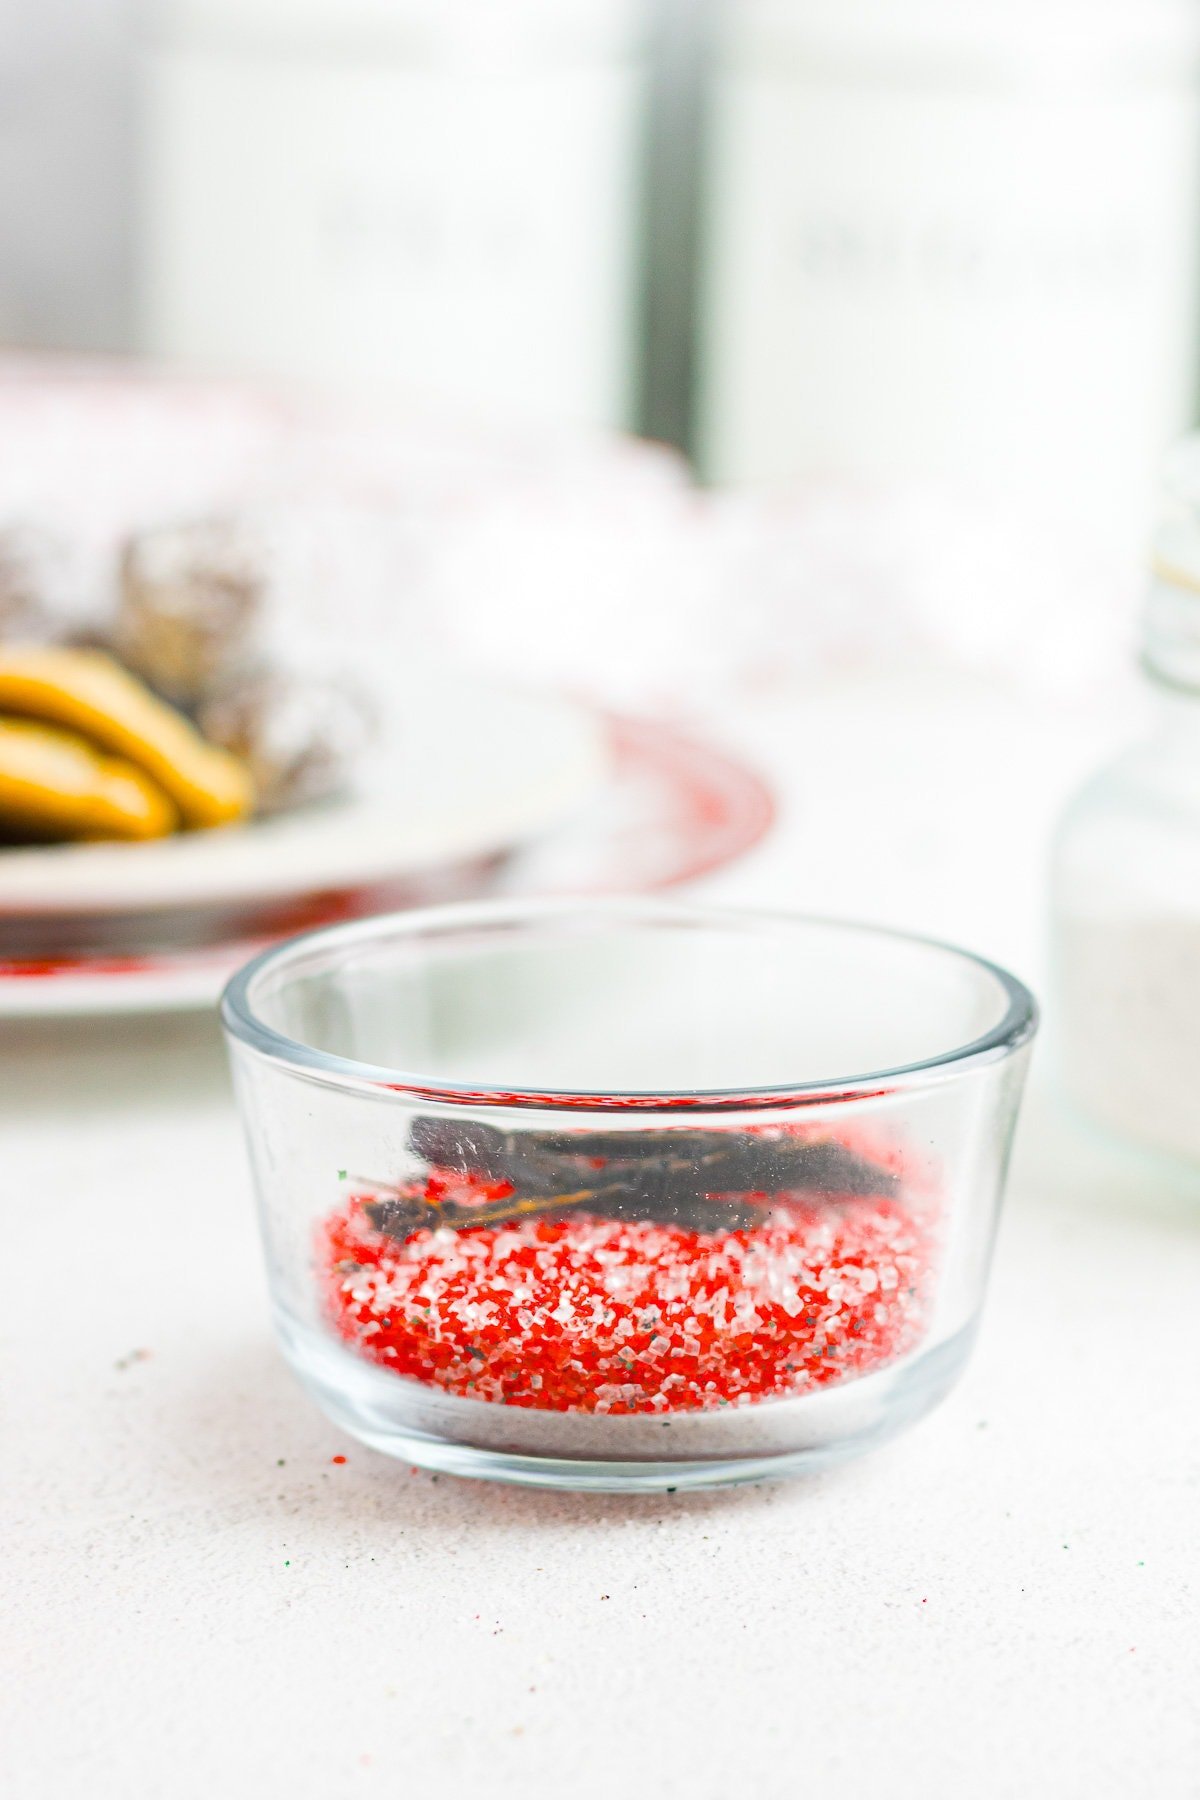 A glass bowl filled with vanilla sugar made with red sugar crystals. Vanilla bean pods lay on top of the sugar.